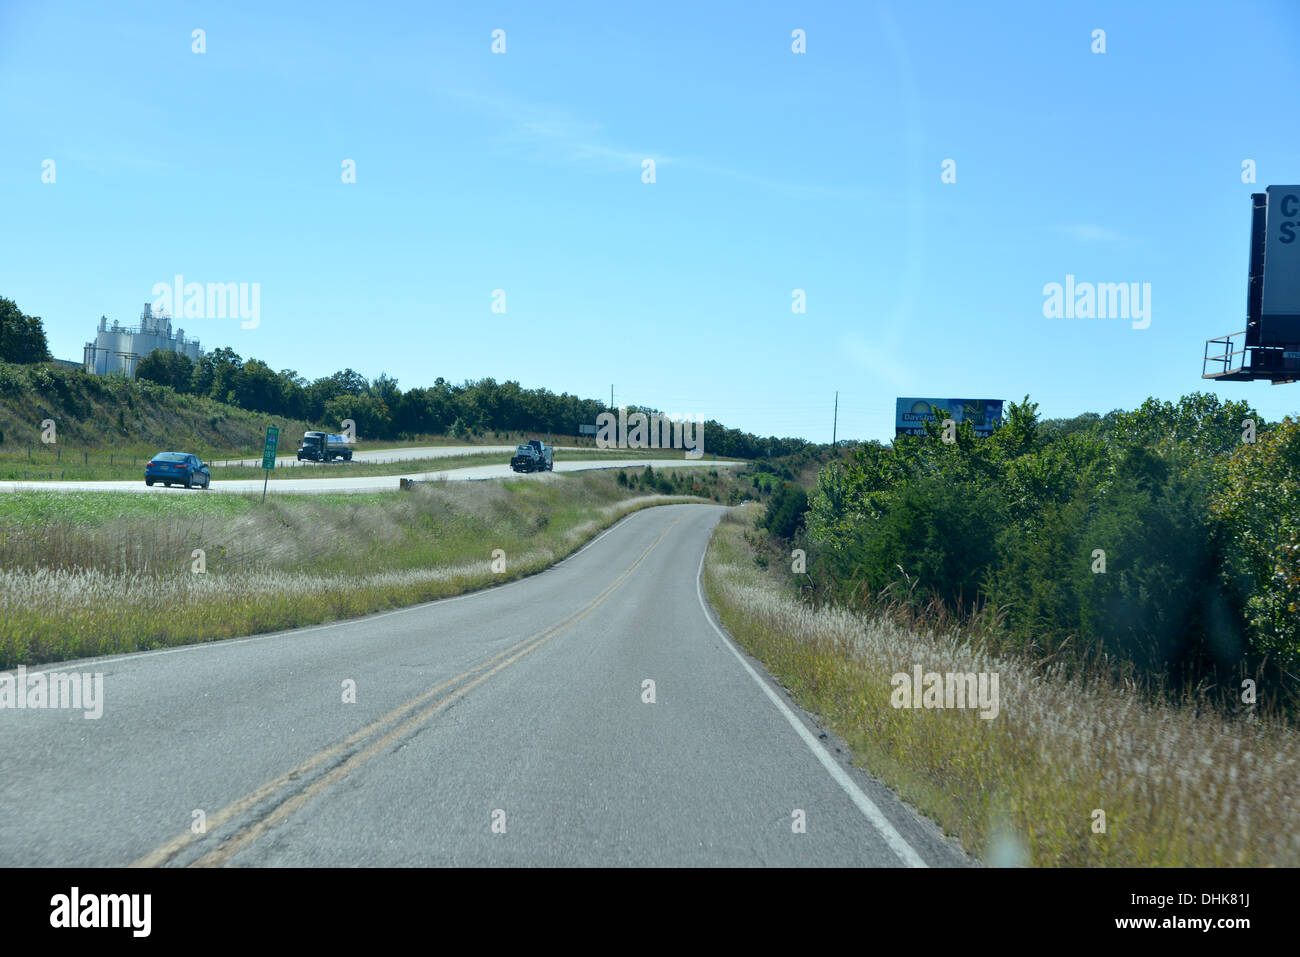 Old Route 66 2 lane road runs alongside new interstate West 44, built to  bypass the old road, in Missouri, USA Stock Photo - Alamy